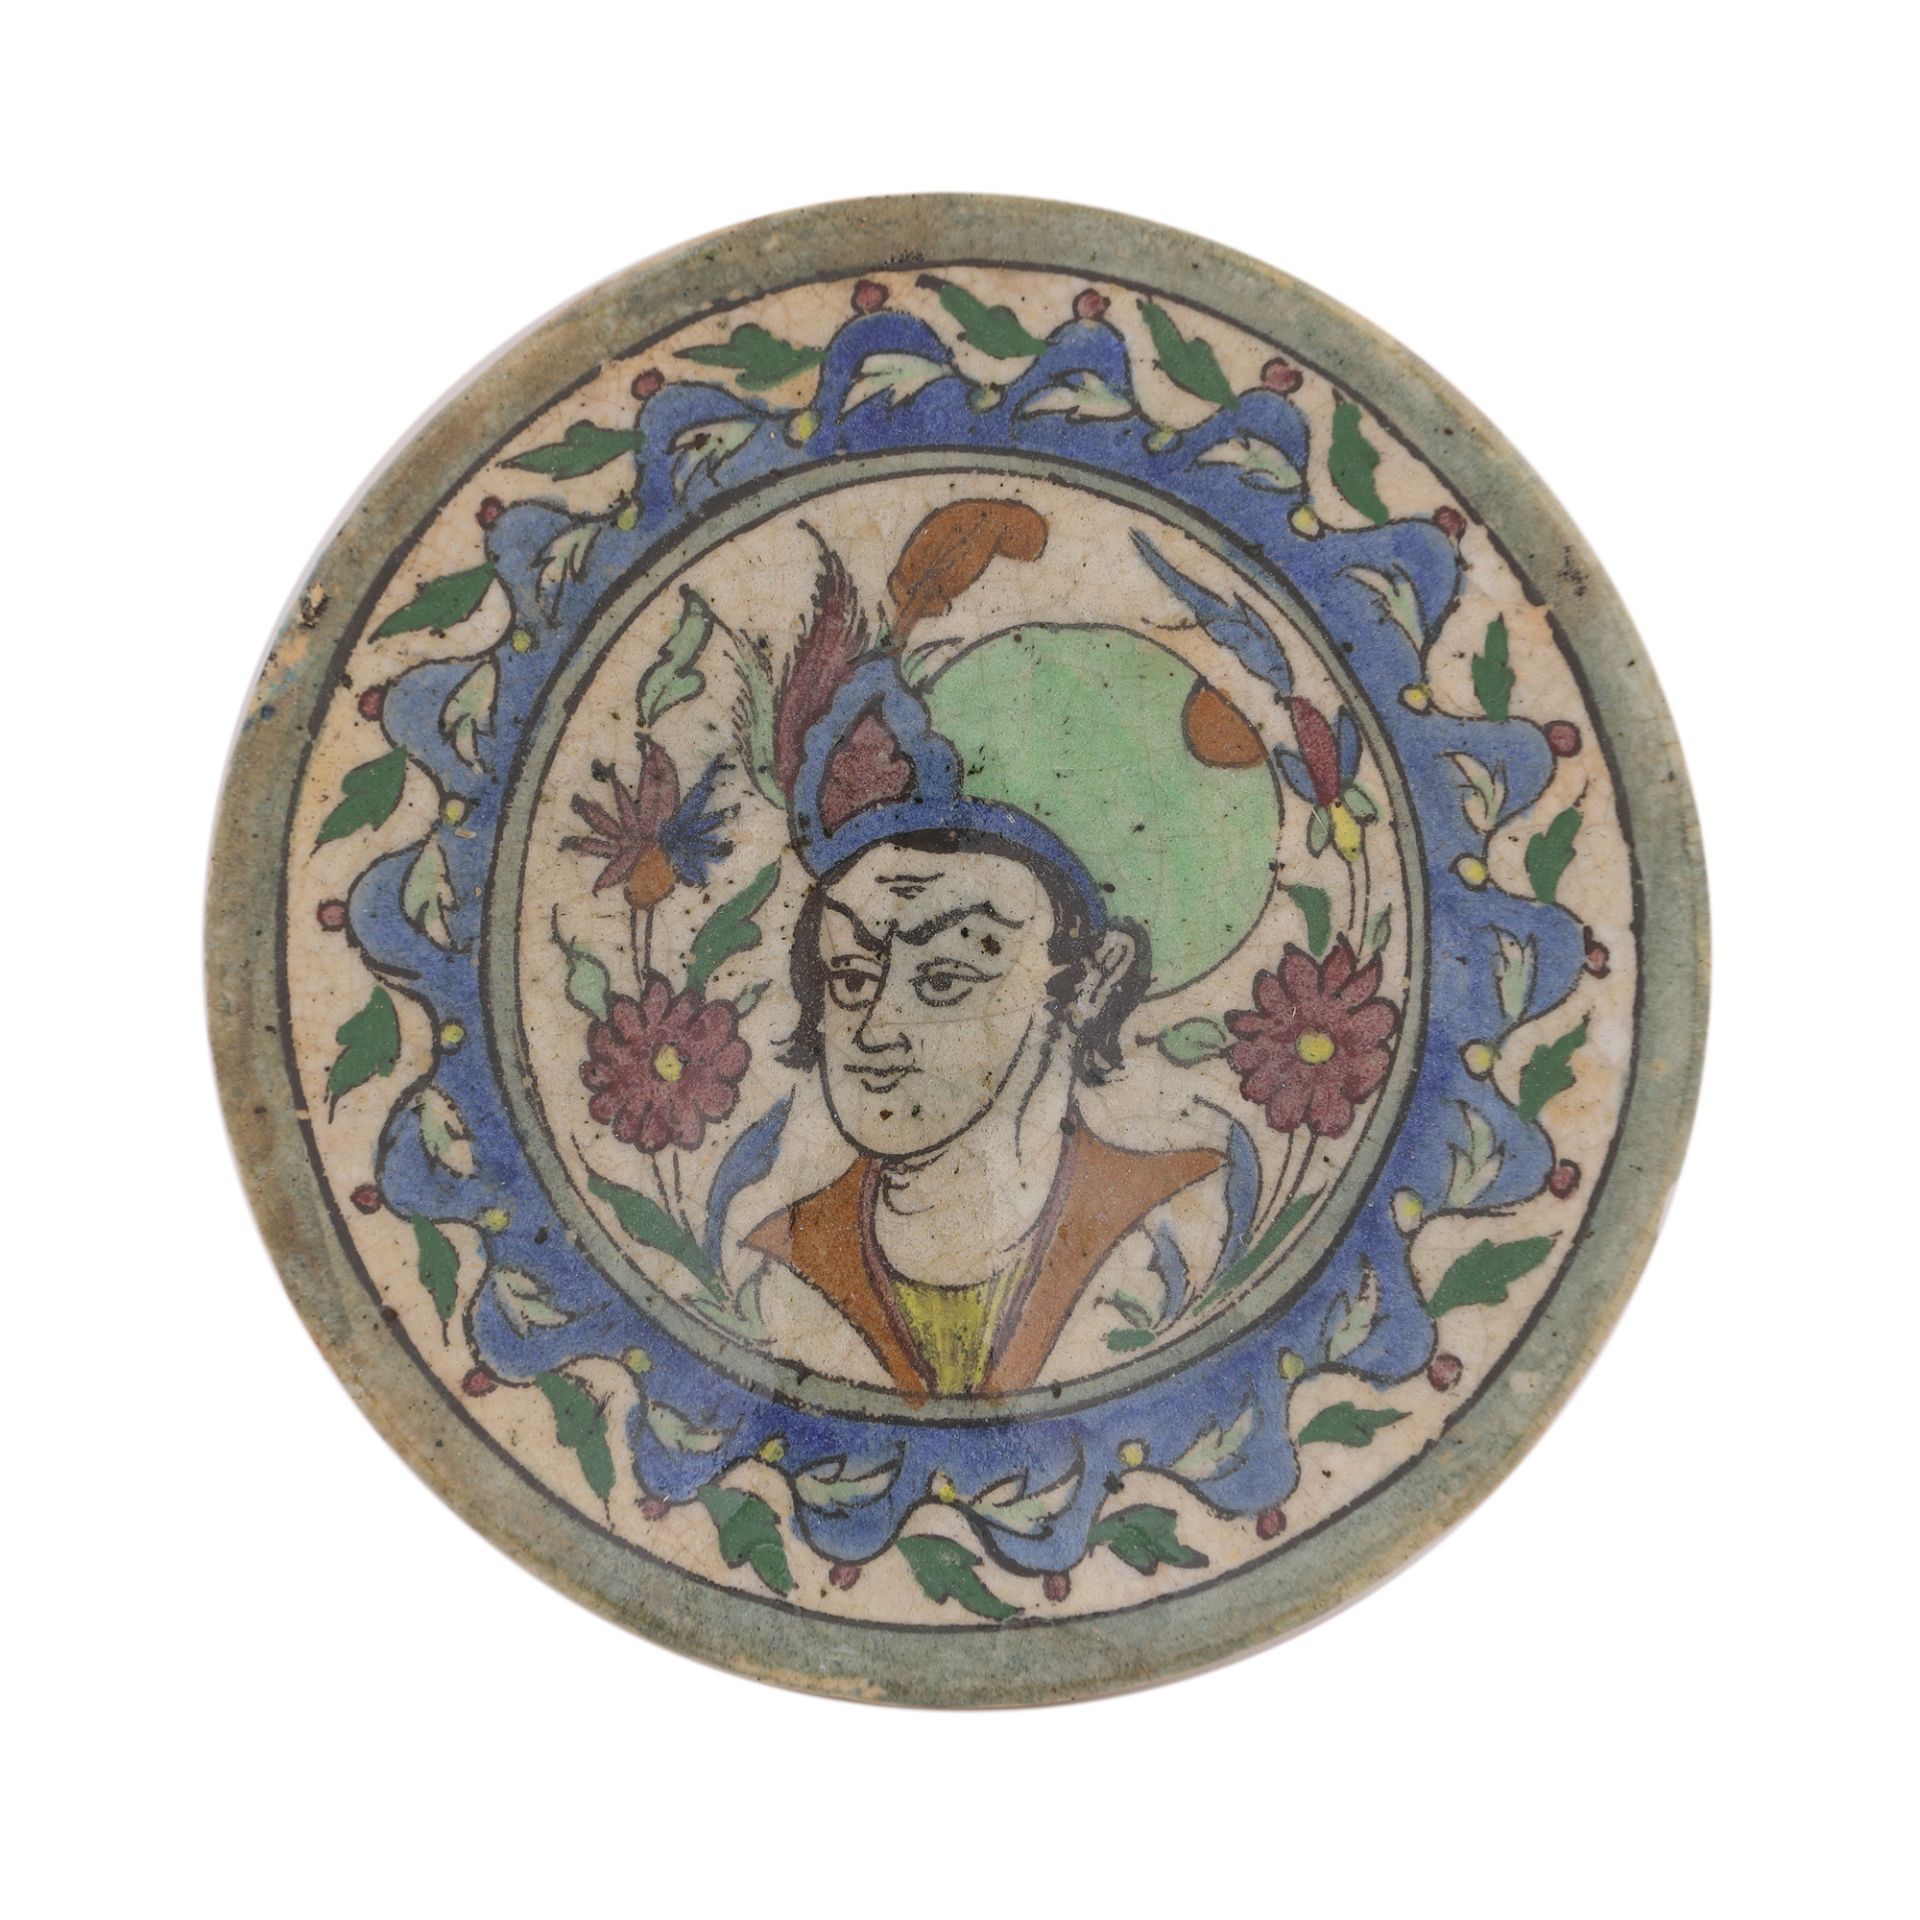 Plate embellished with vegetal motifs, illustrating a nobleman, Iran, start of the 19th century